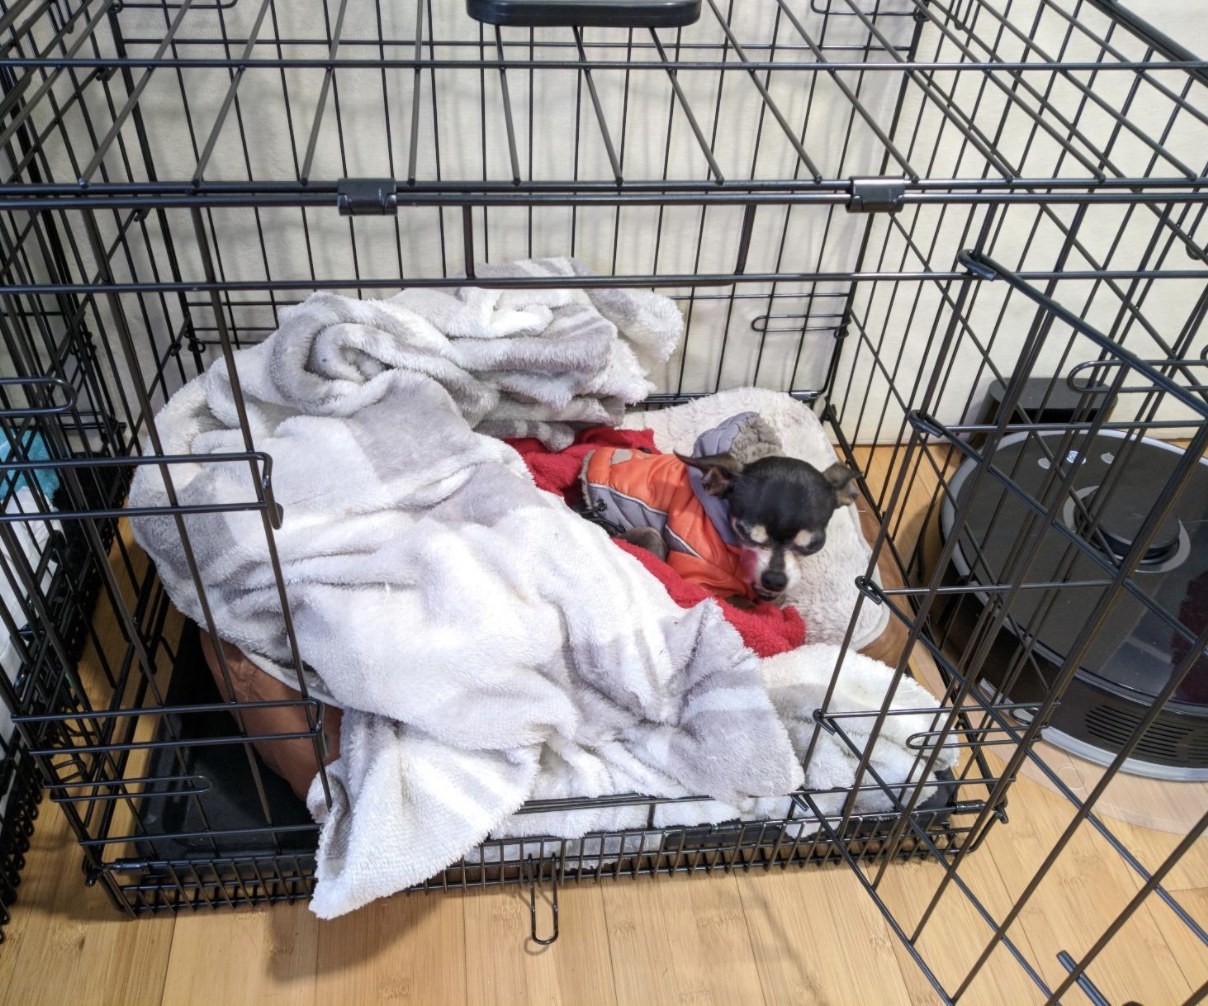 A chihuahua cuddled into blankets in a metal crate